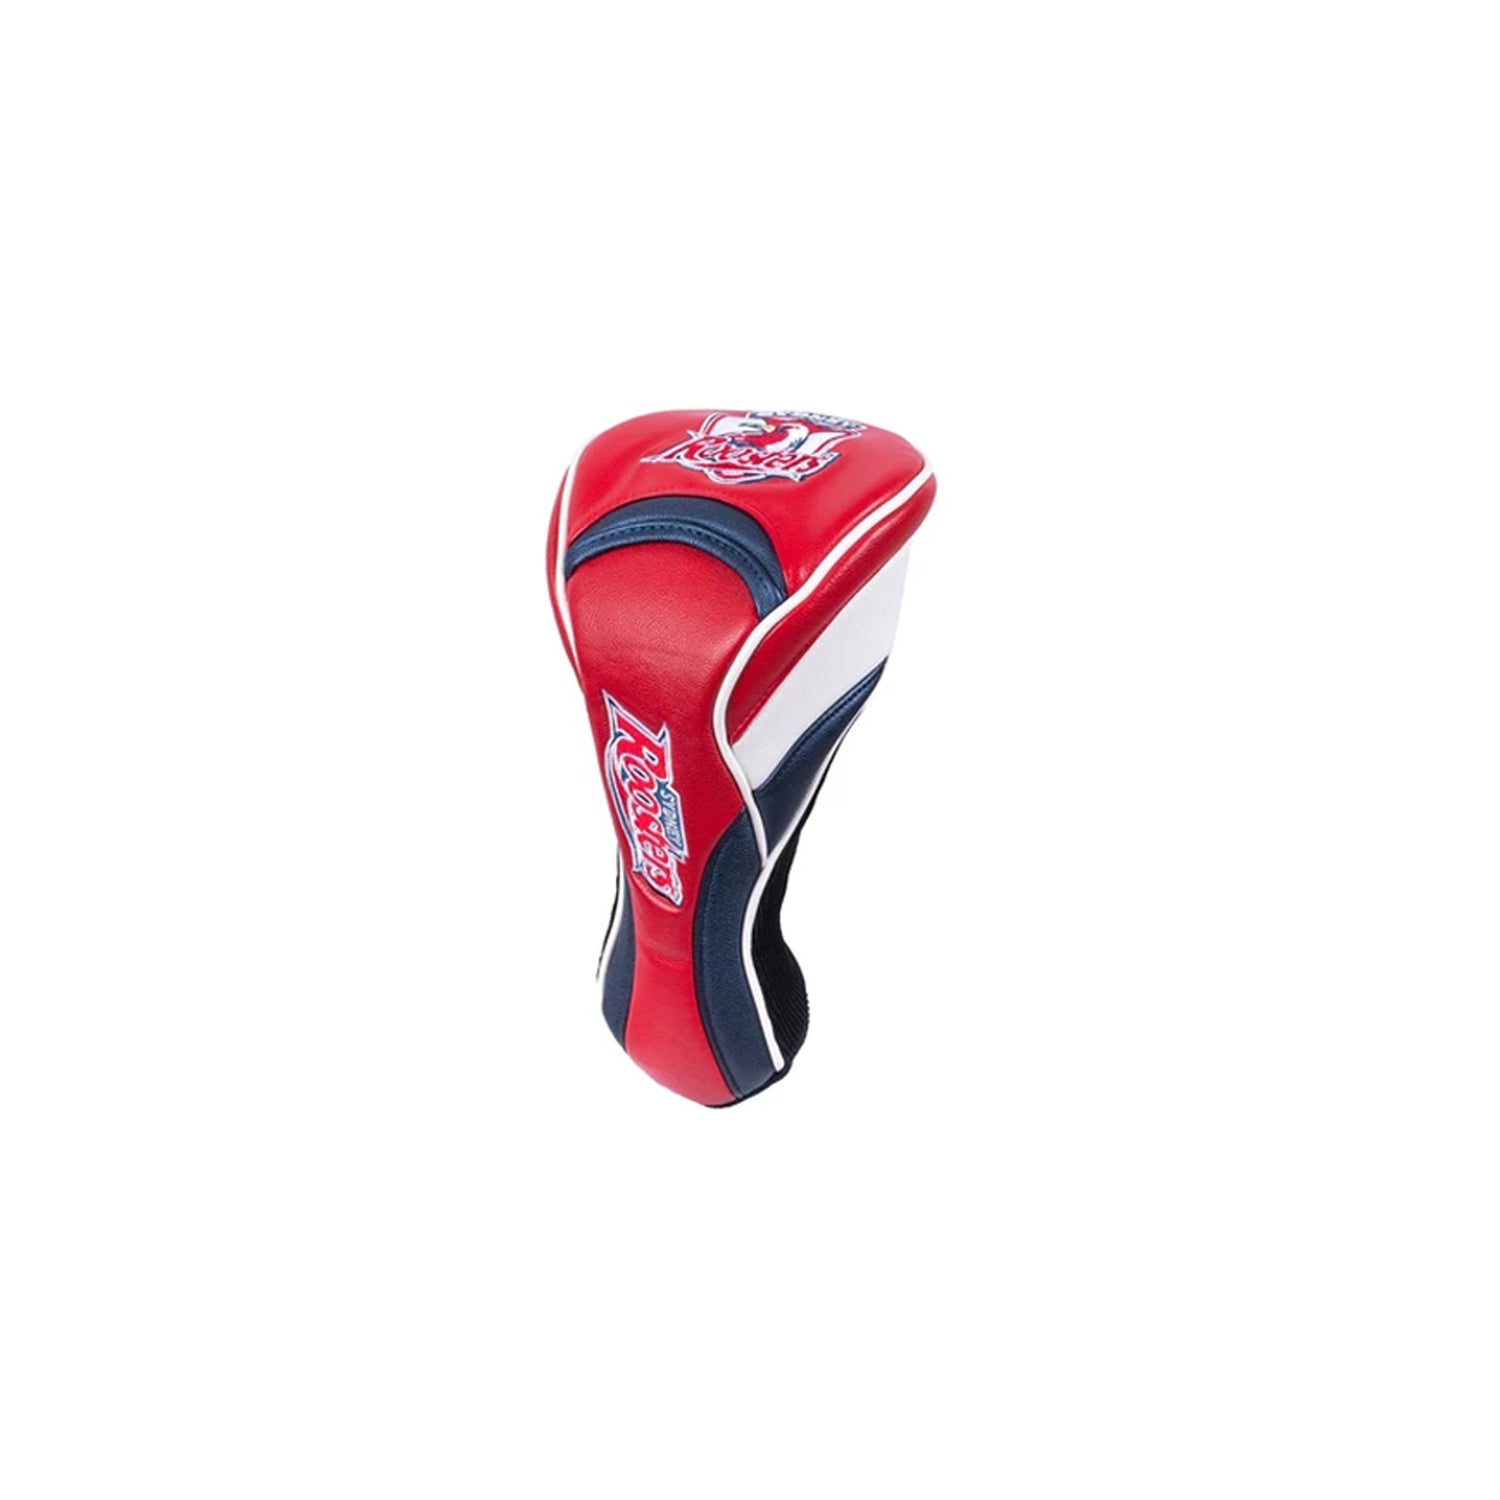 NRL DRIVER HEAD COVER_SYDNEY ROOSTERS_STUBBY CLUB